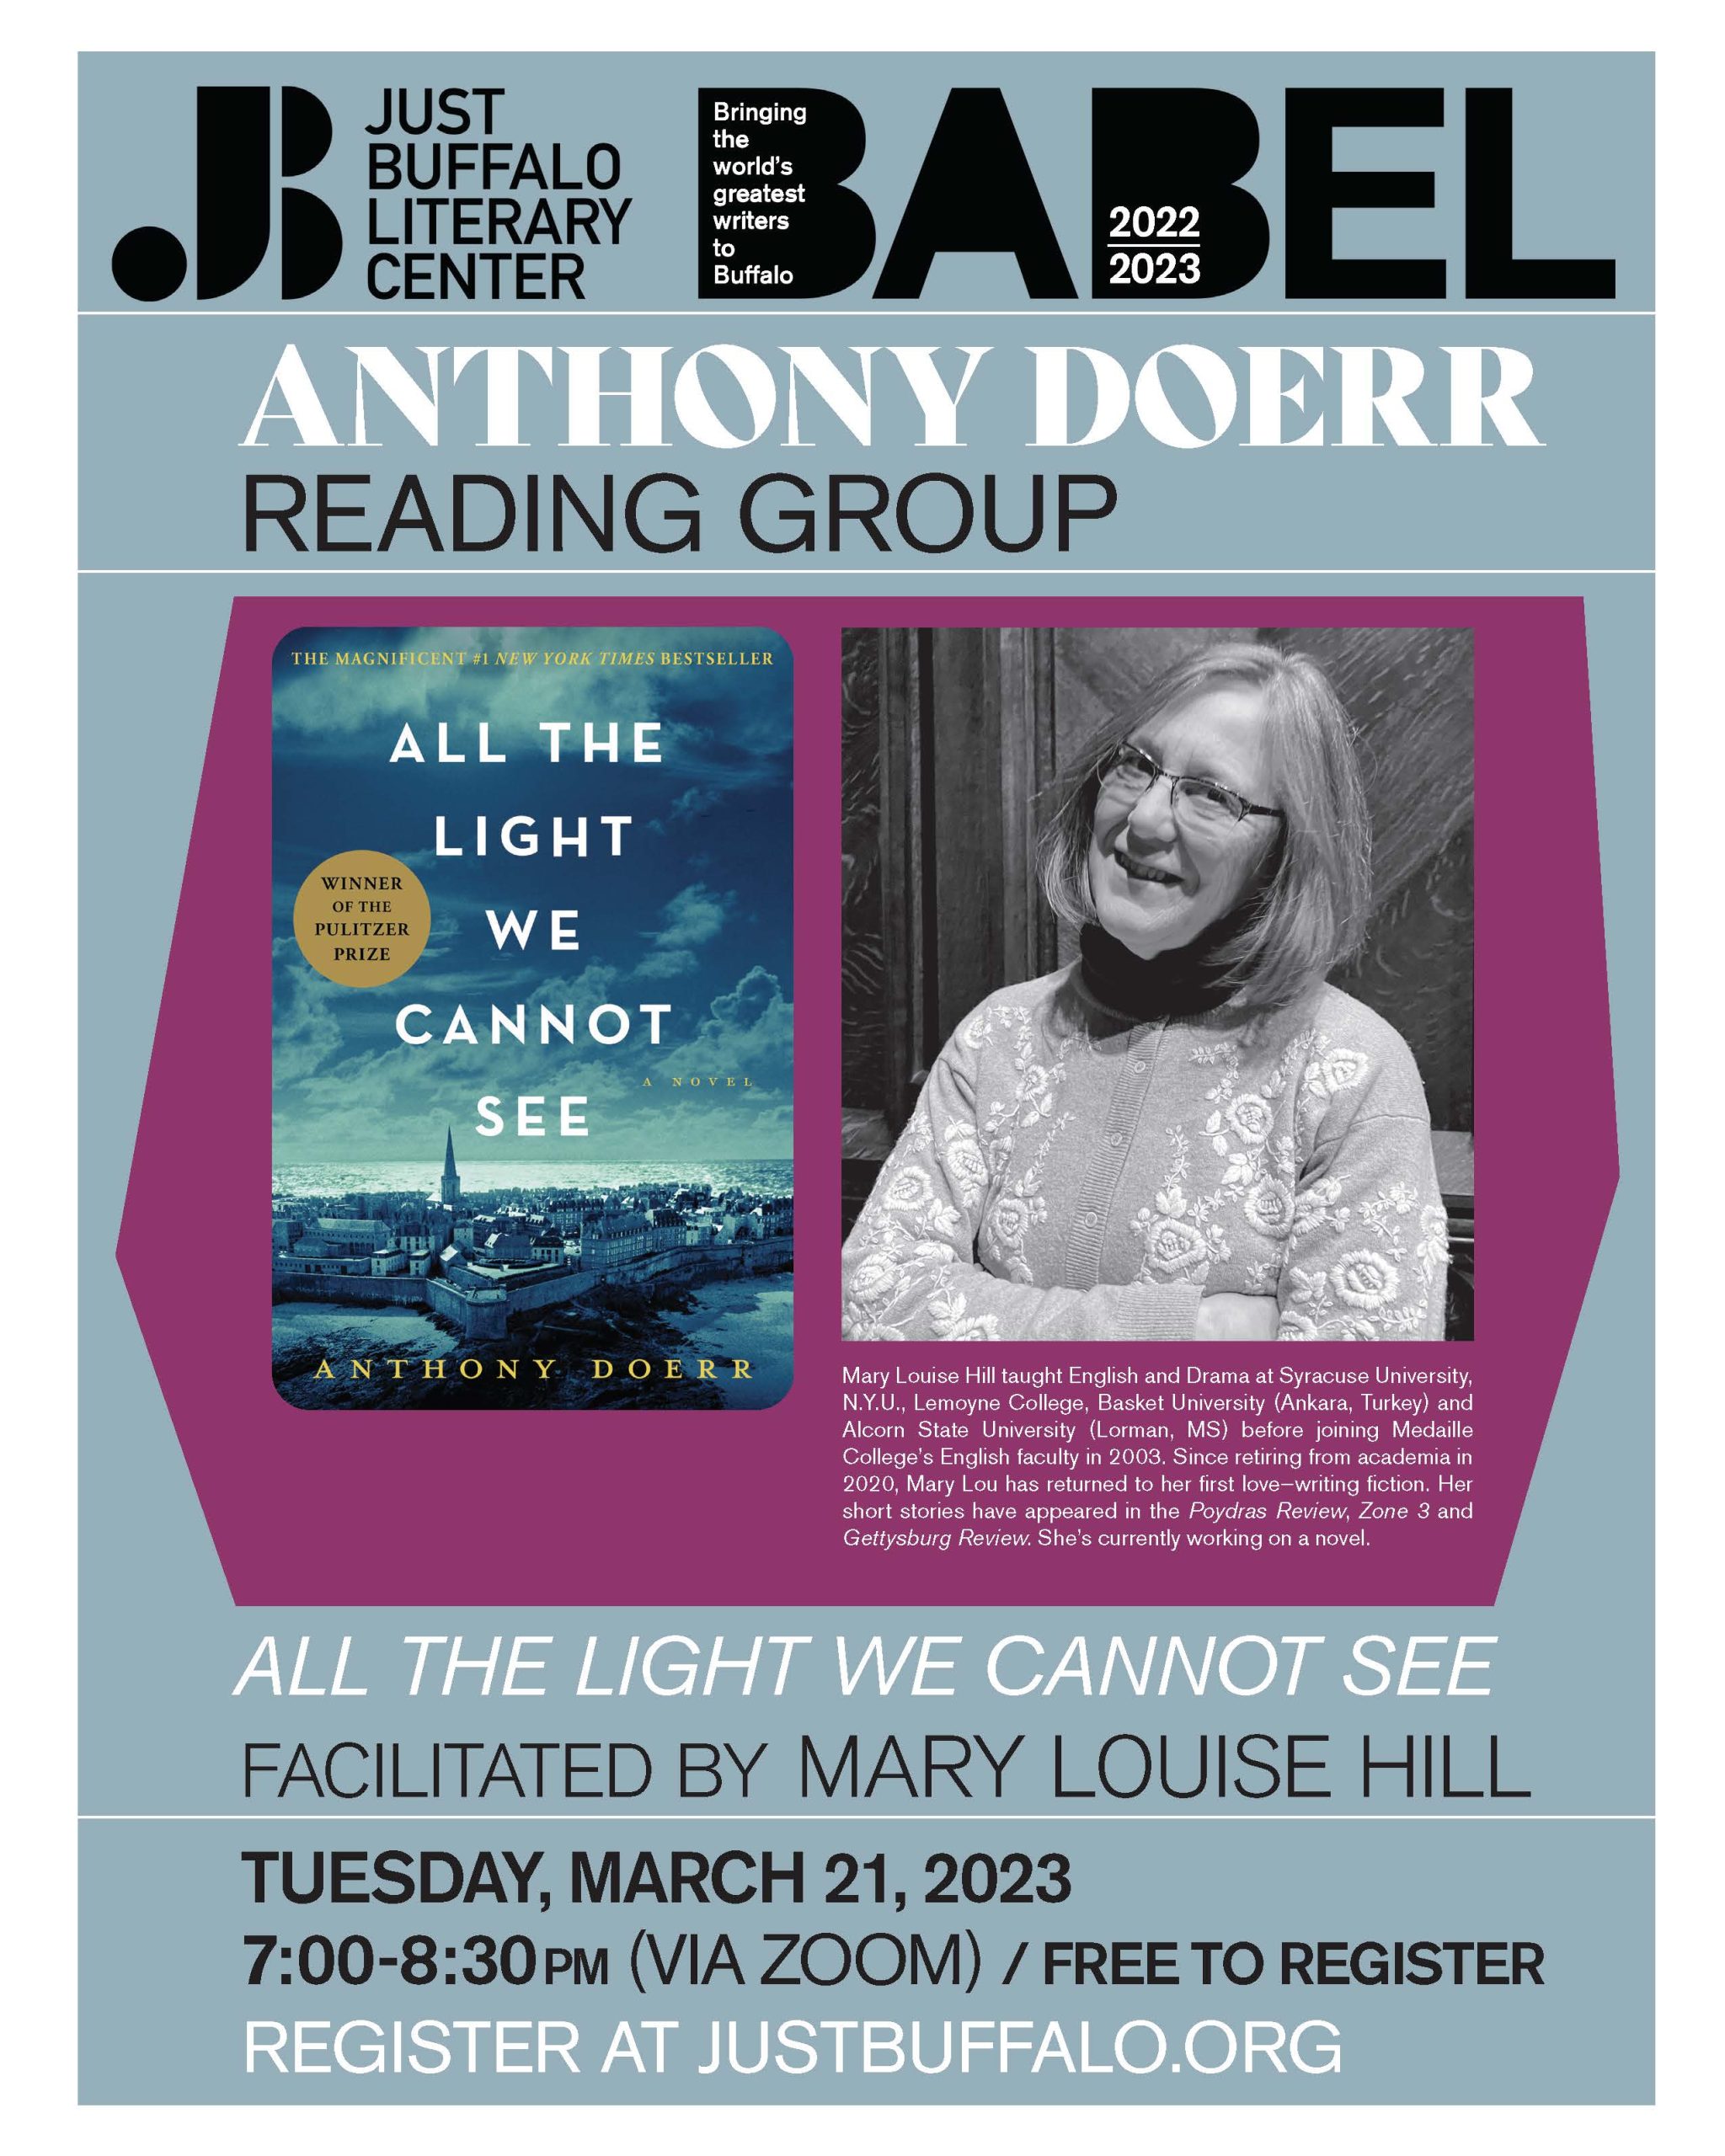 BABEL virtual reading group with Mary Louise Hill